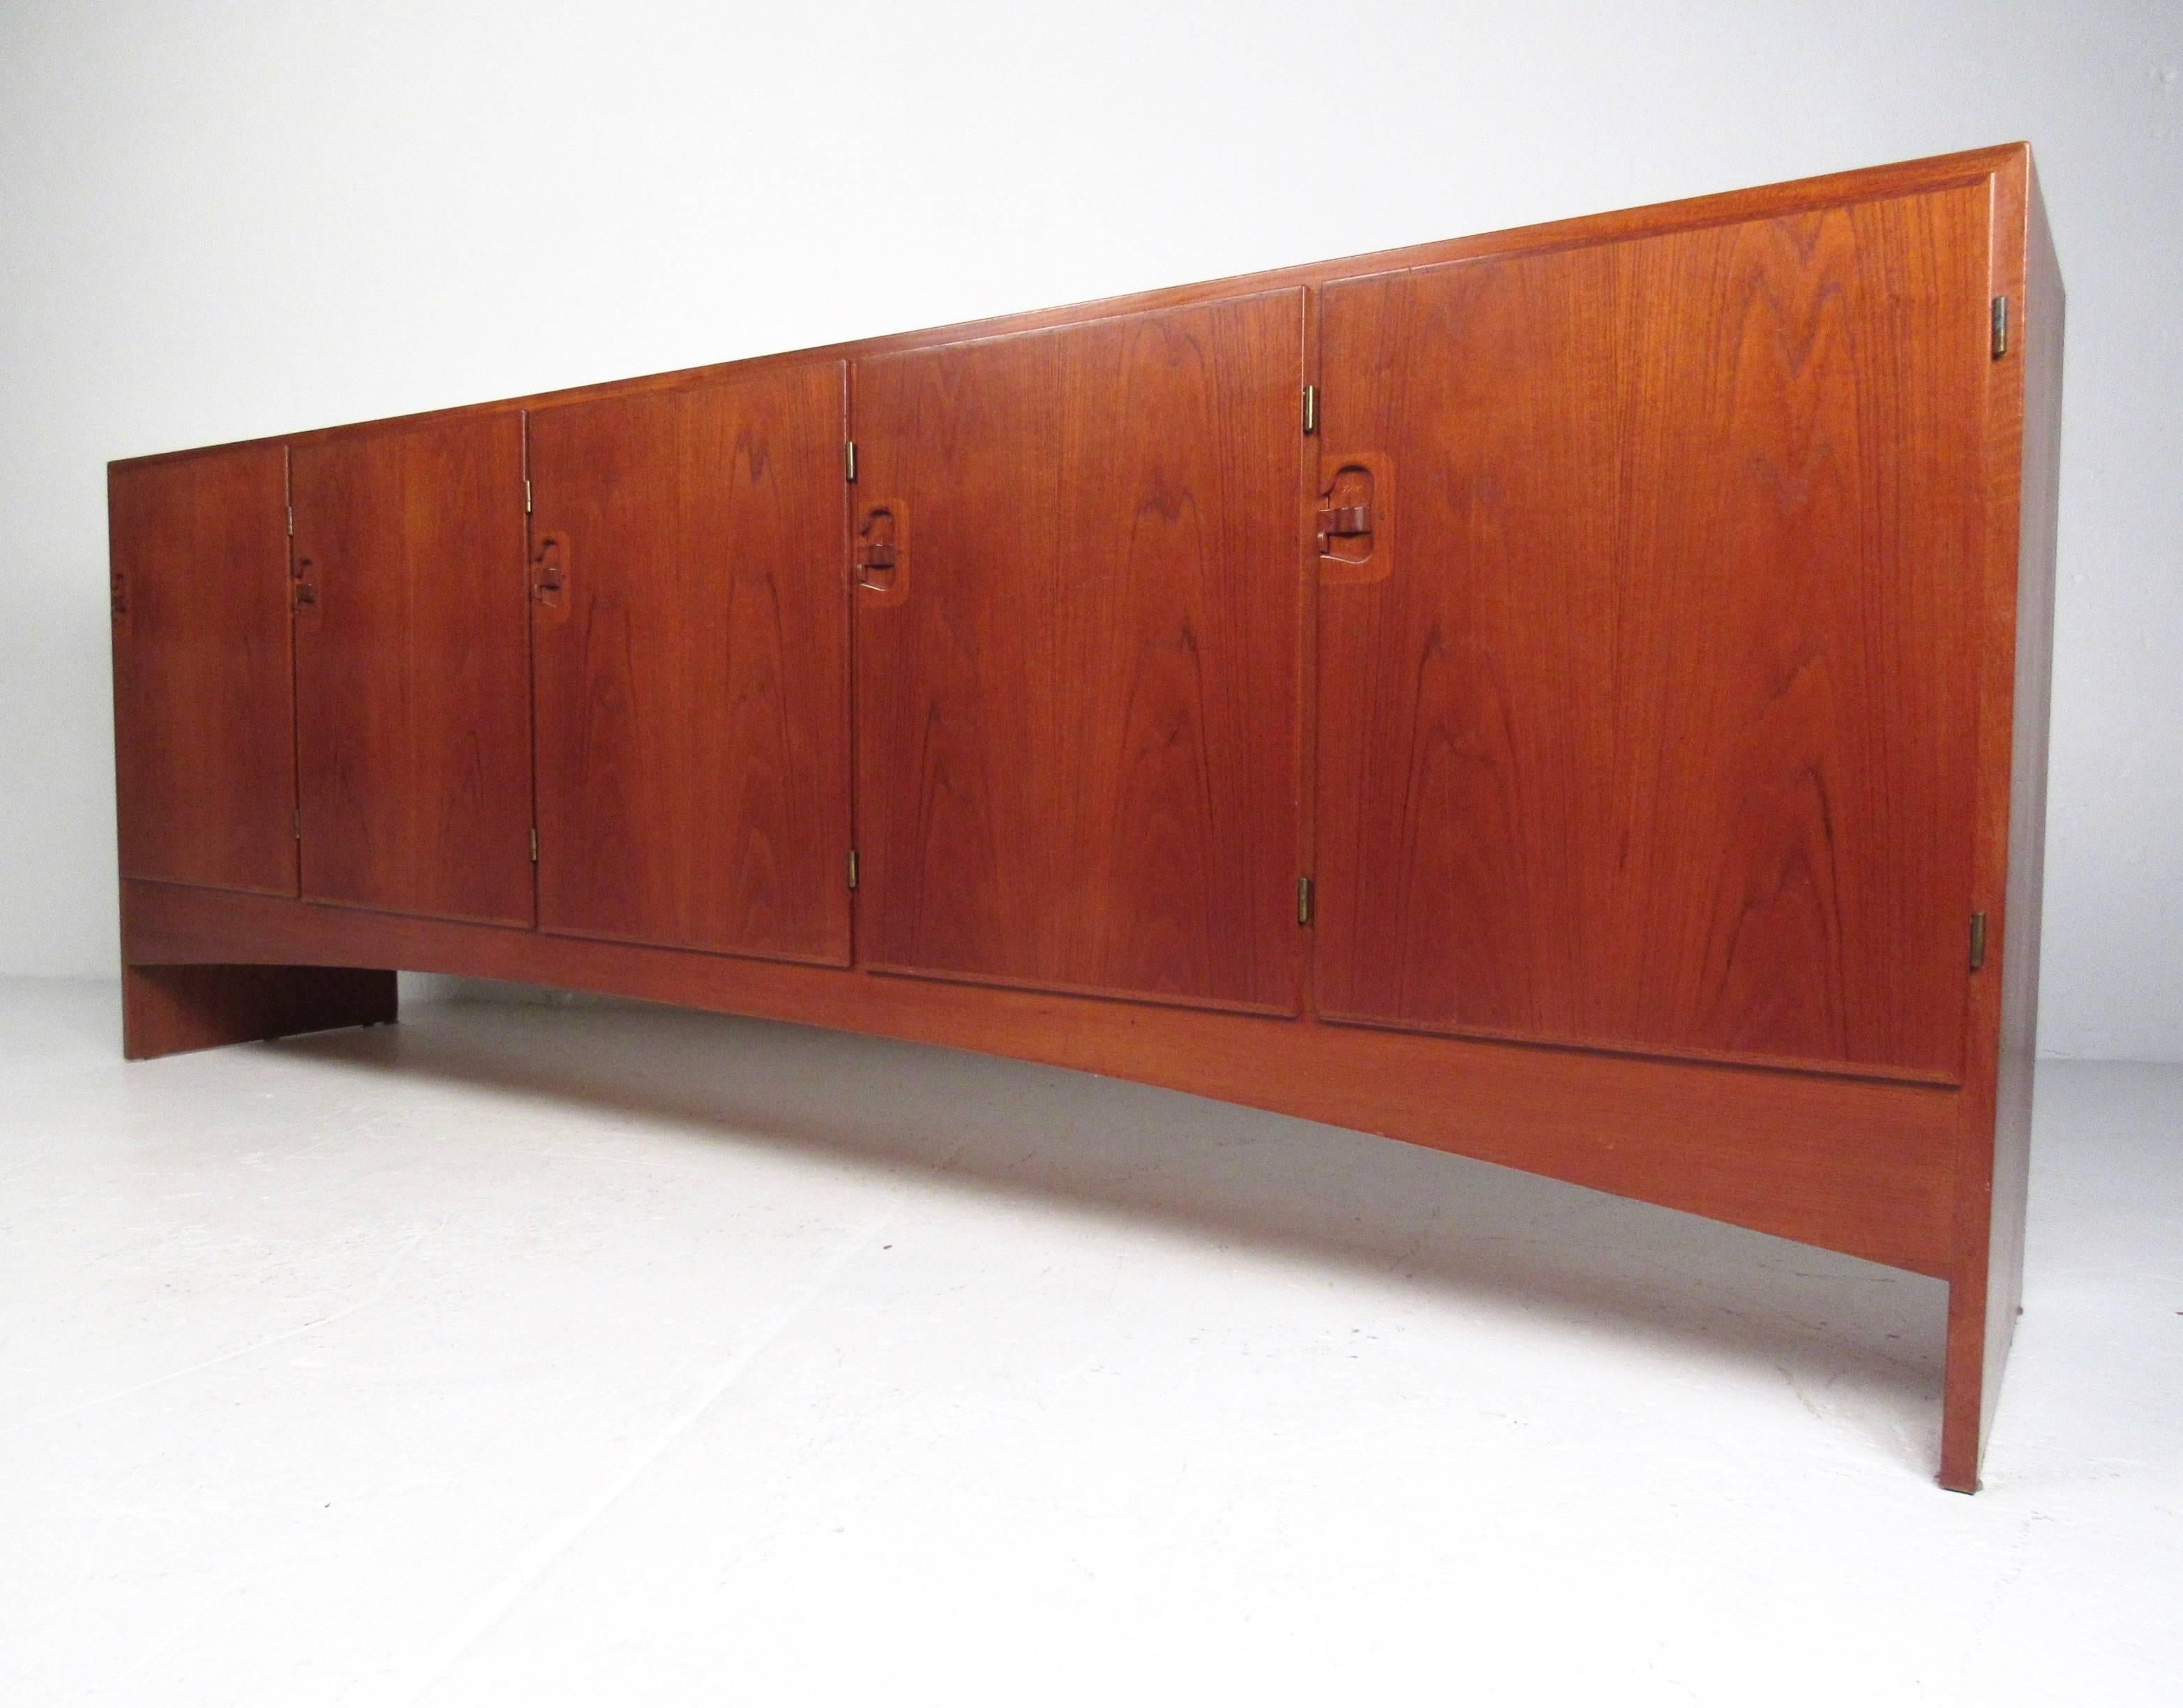 This long sideboard features a beautiful vintage teak finish with five spacious cabinets for storage in any setting. Ideal mid-century credenza for office use or dining room storage. Adjustable shelves, dovetailed drawers, and unique drop-latch door